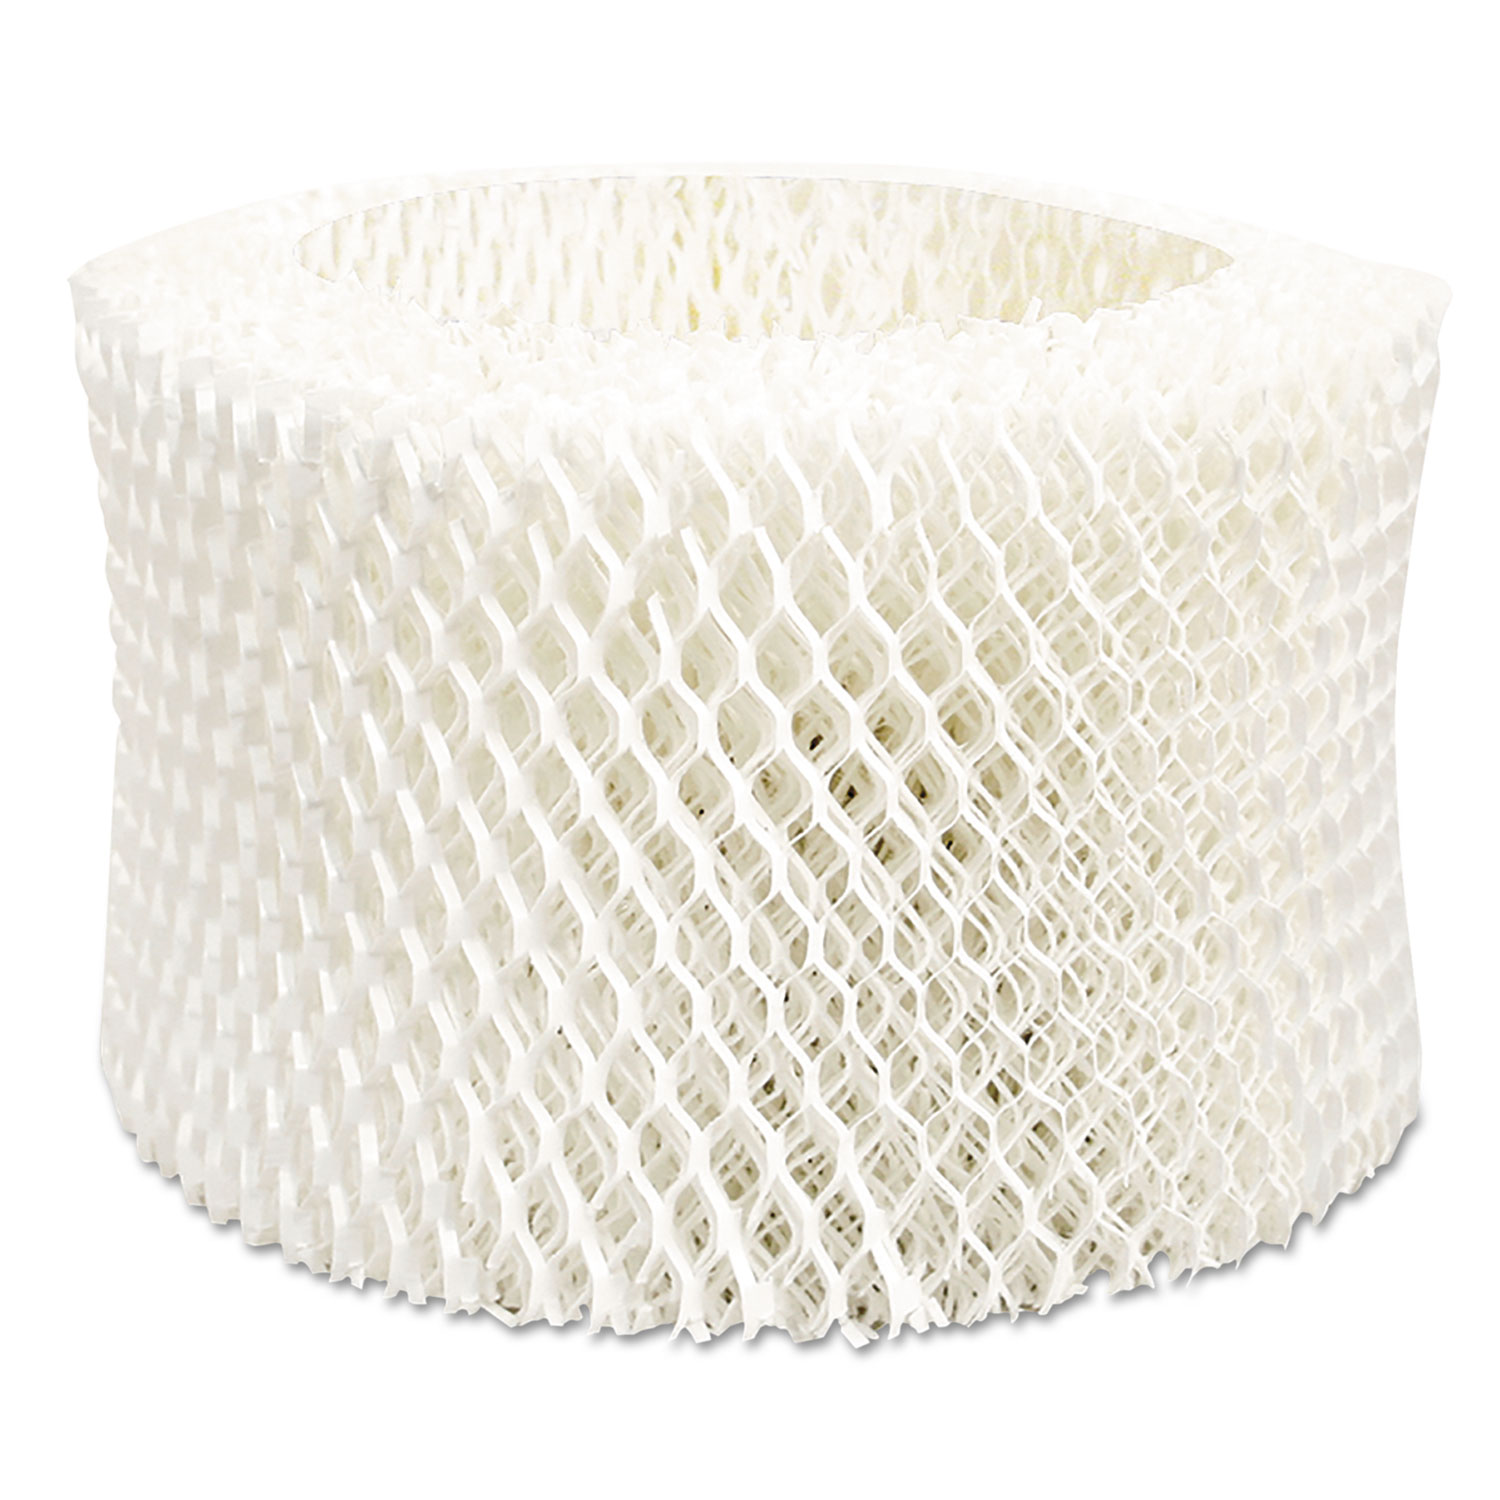 Quietcare Console Humidifier Replacement Filter